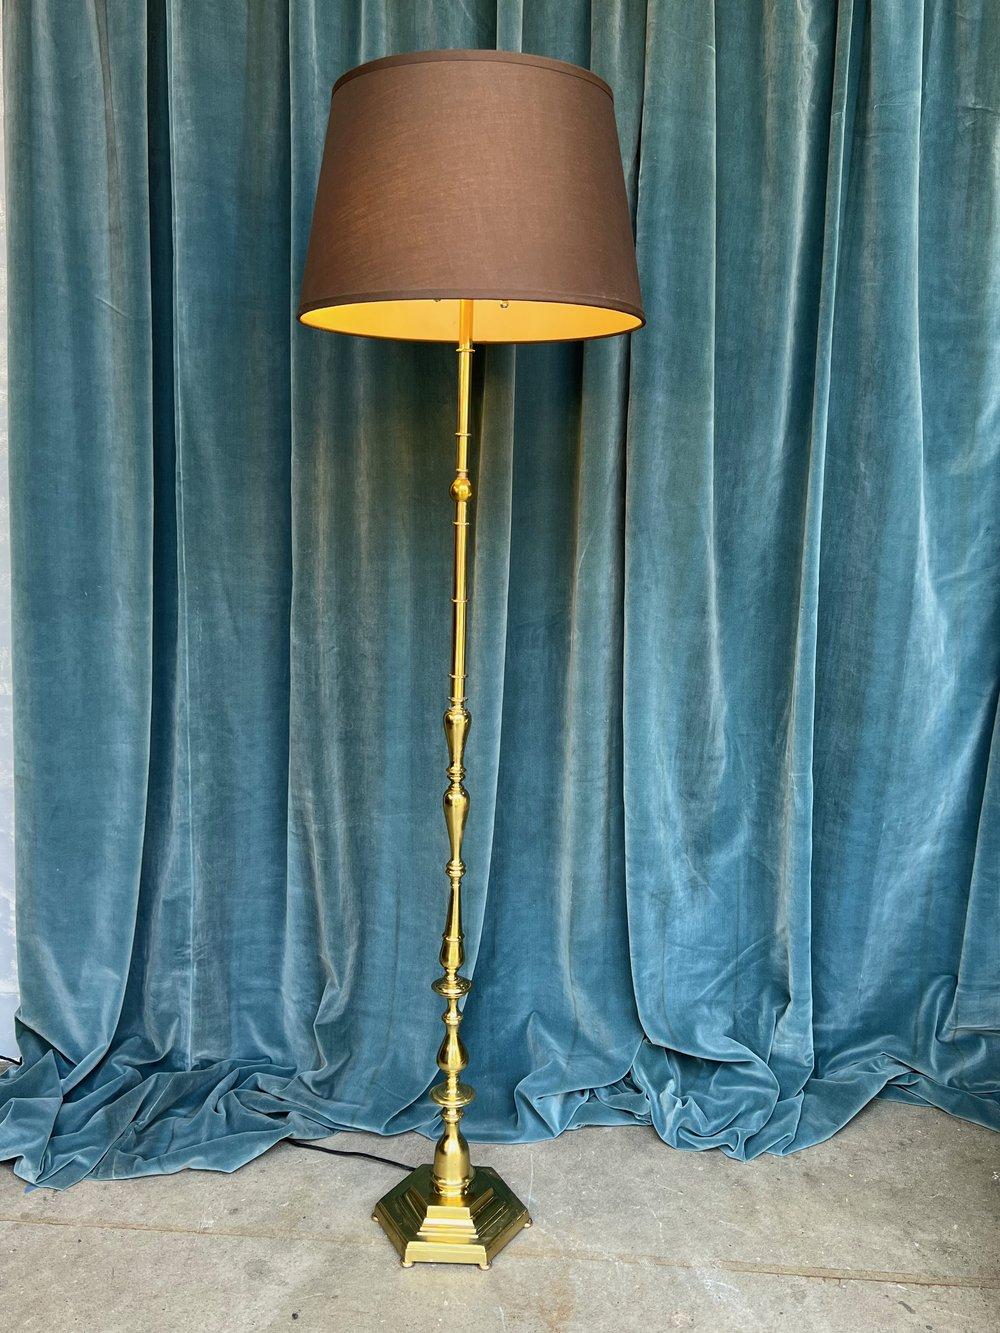 A beautiful French brass floor lamp from the 1940s featuring an elegant design with a footed hexagonal base. This vintage piece is a striking addition to any decor, catching the eye with its timeless appeal. While there is some tarnishing and wear